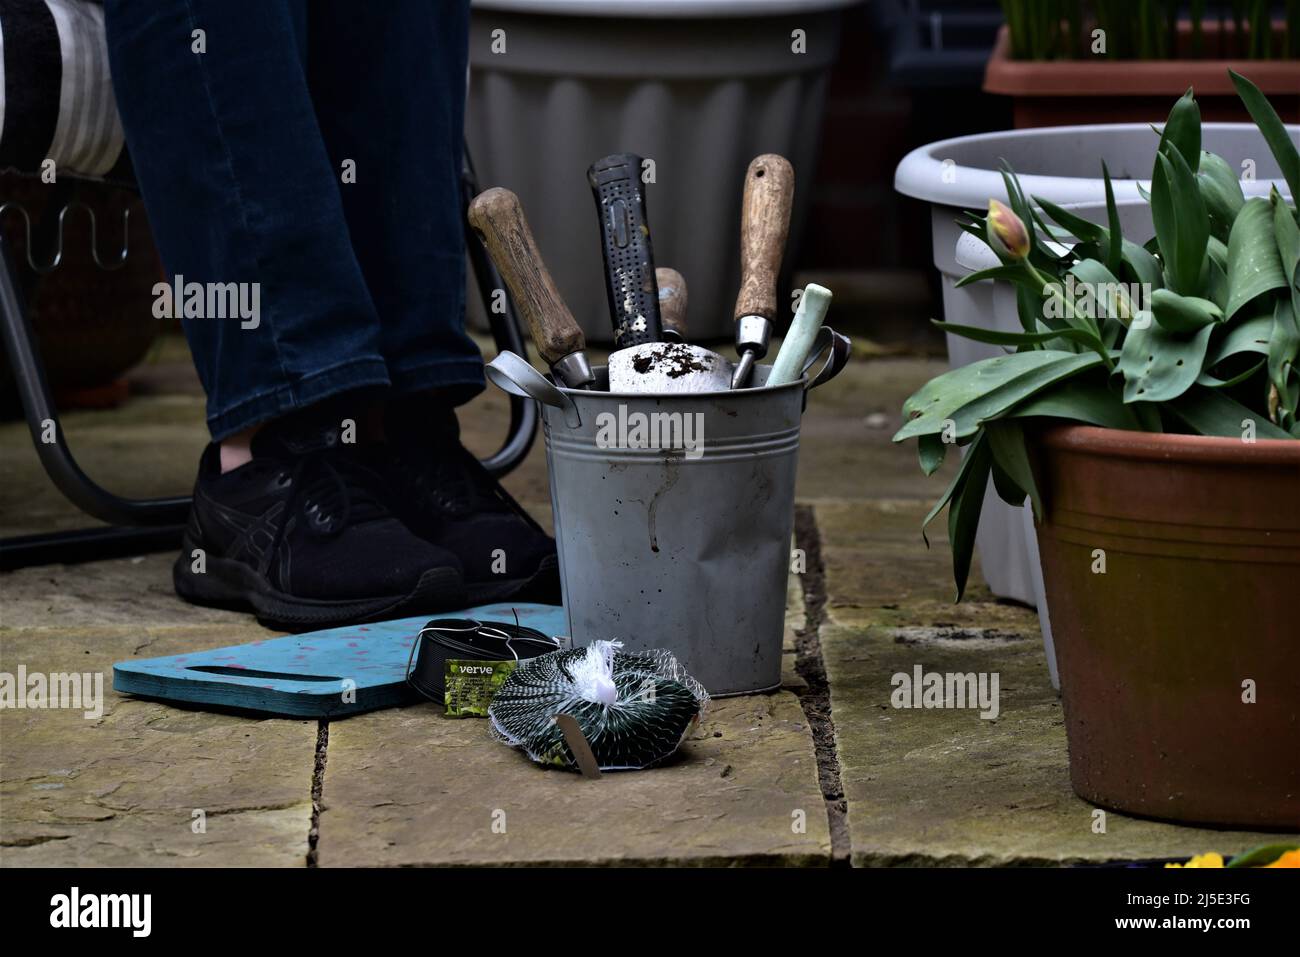 Generic garden pictures showing a trowel and fork, Springtime or early  Summer garden soil preparation or seed sowing Stock Photo